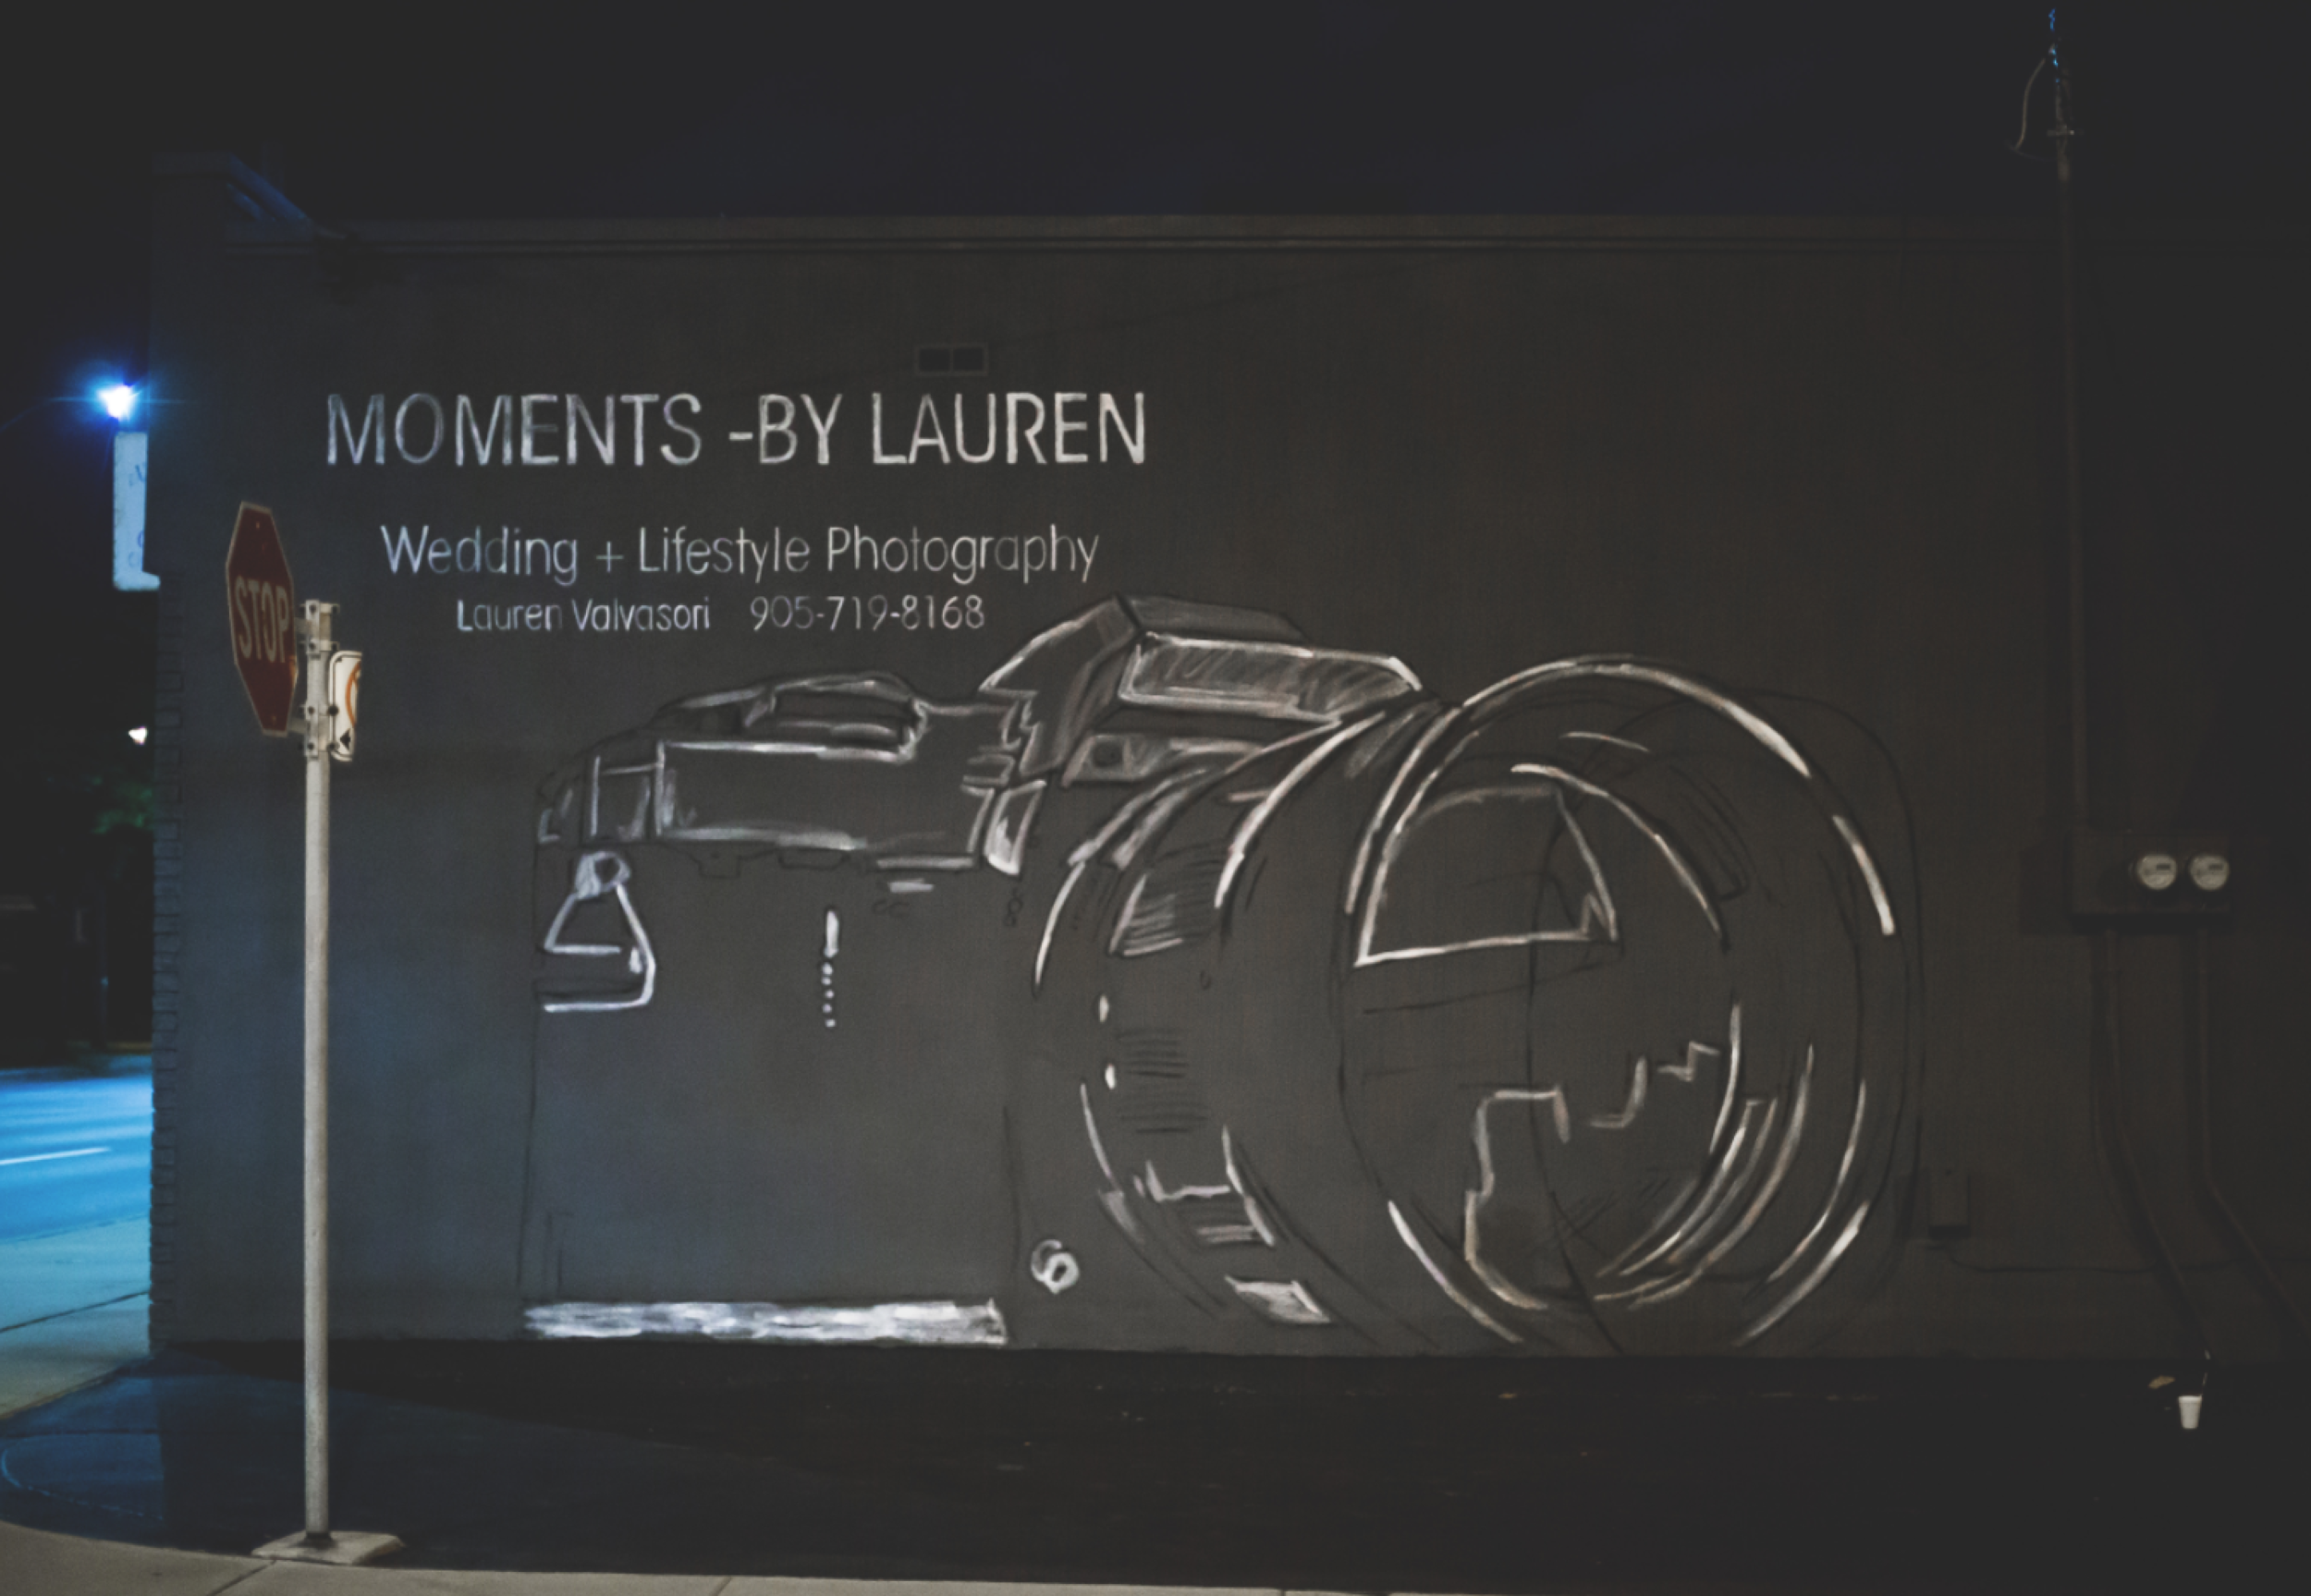 Moments-by-Lauren-Camera-Mural-Claire-Hall-Design-Photo-4.png